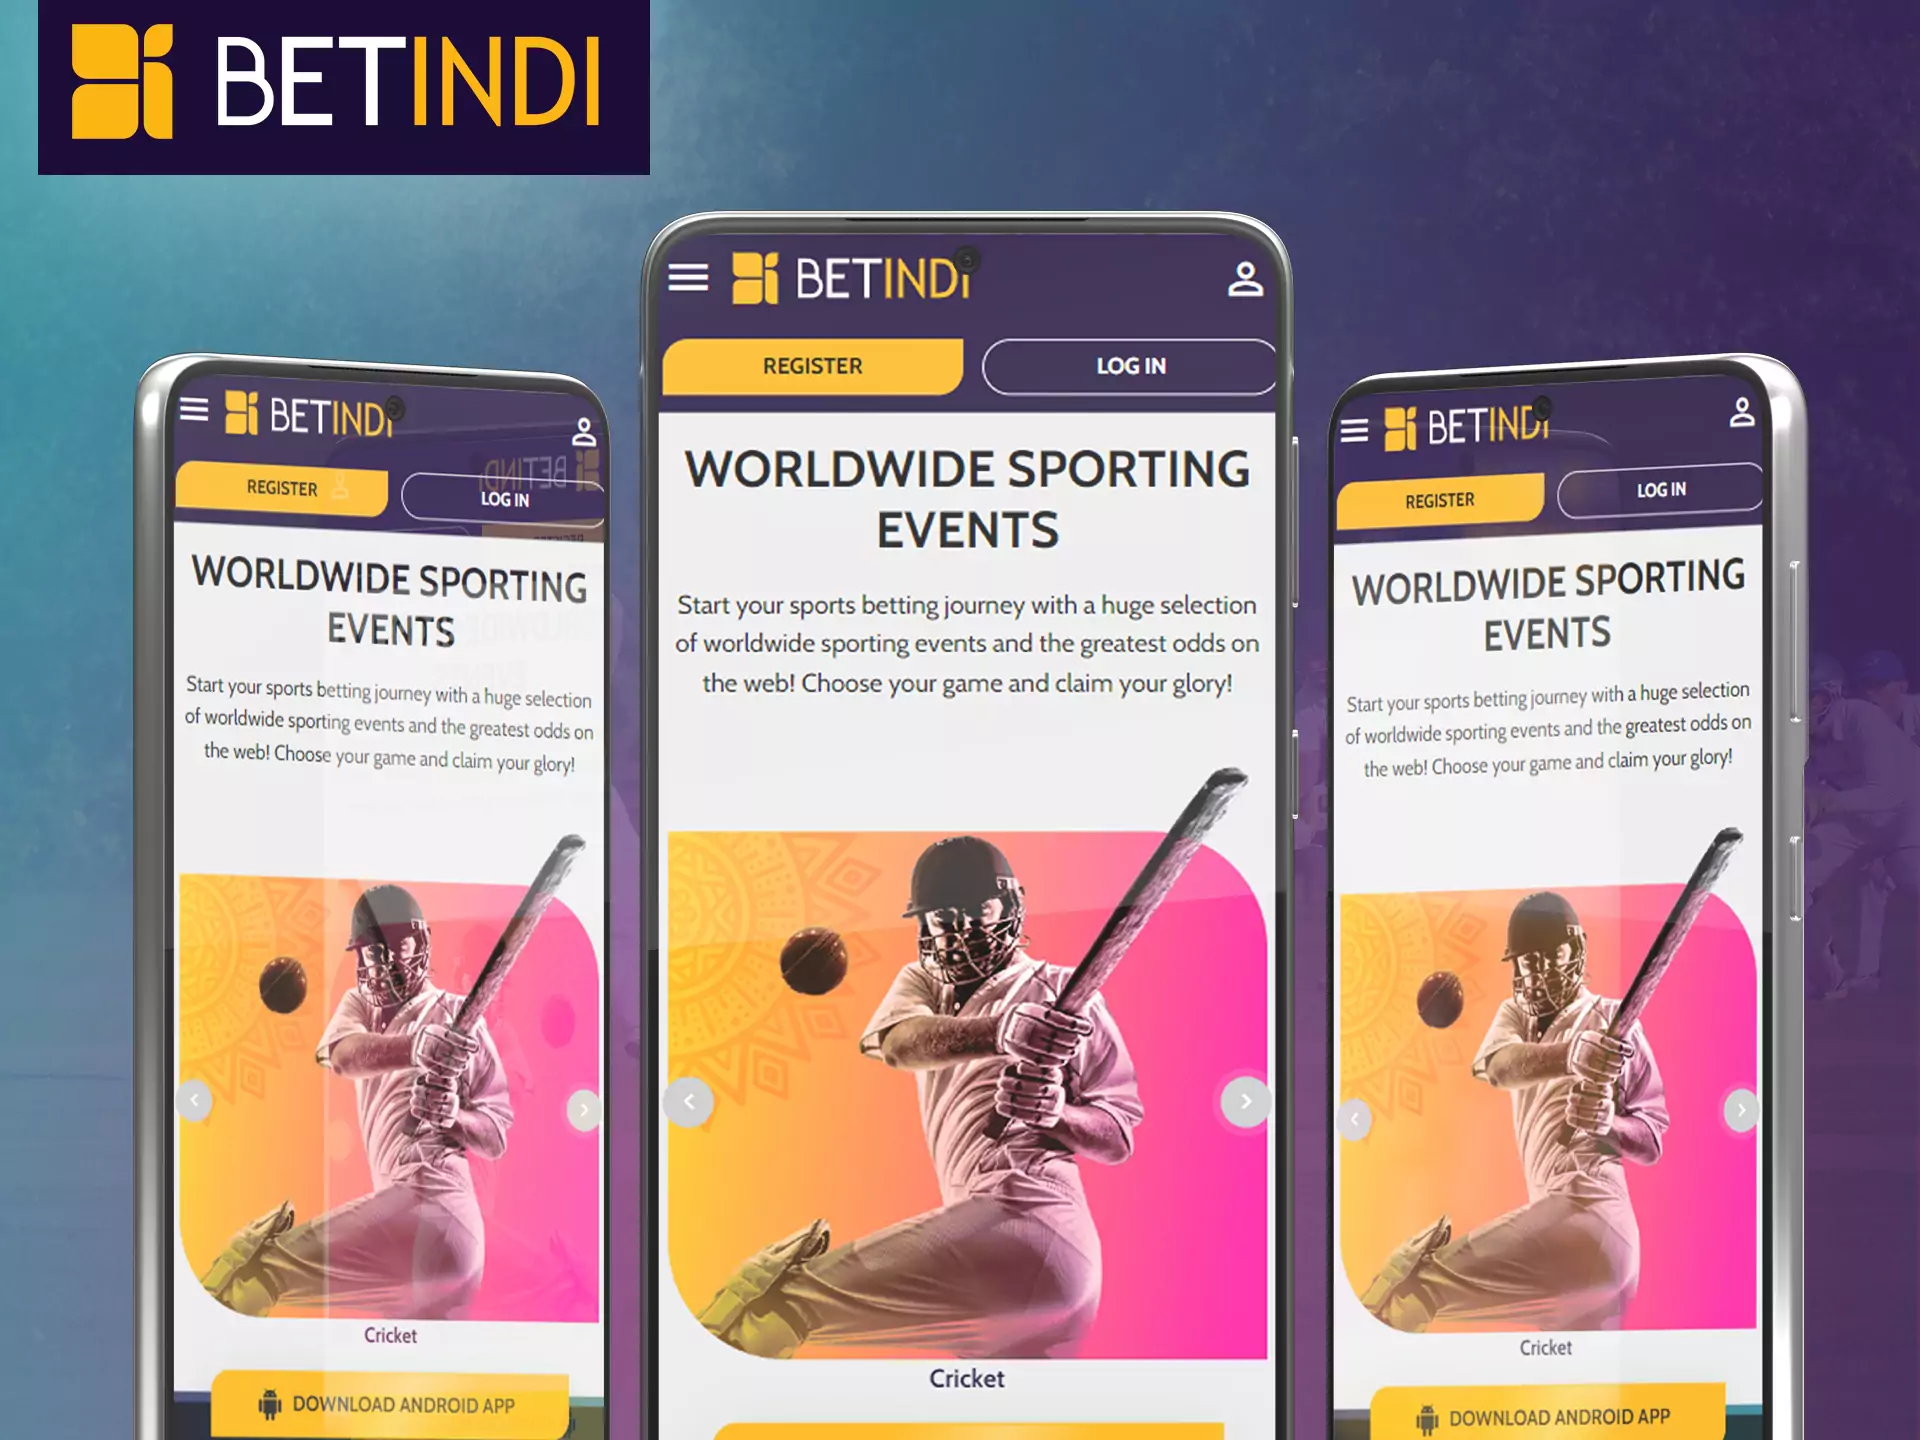 Play with Betindi on any Android device.